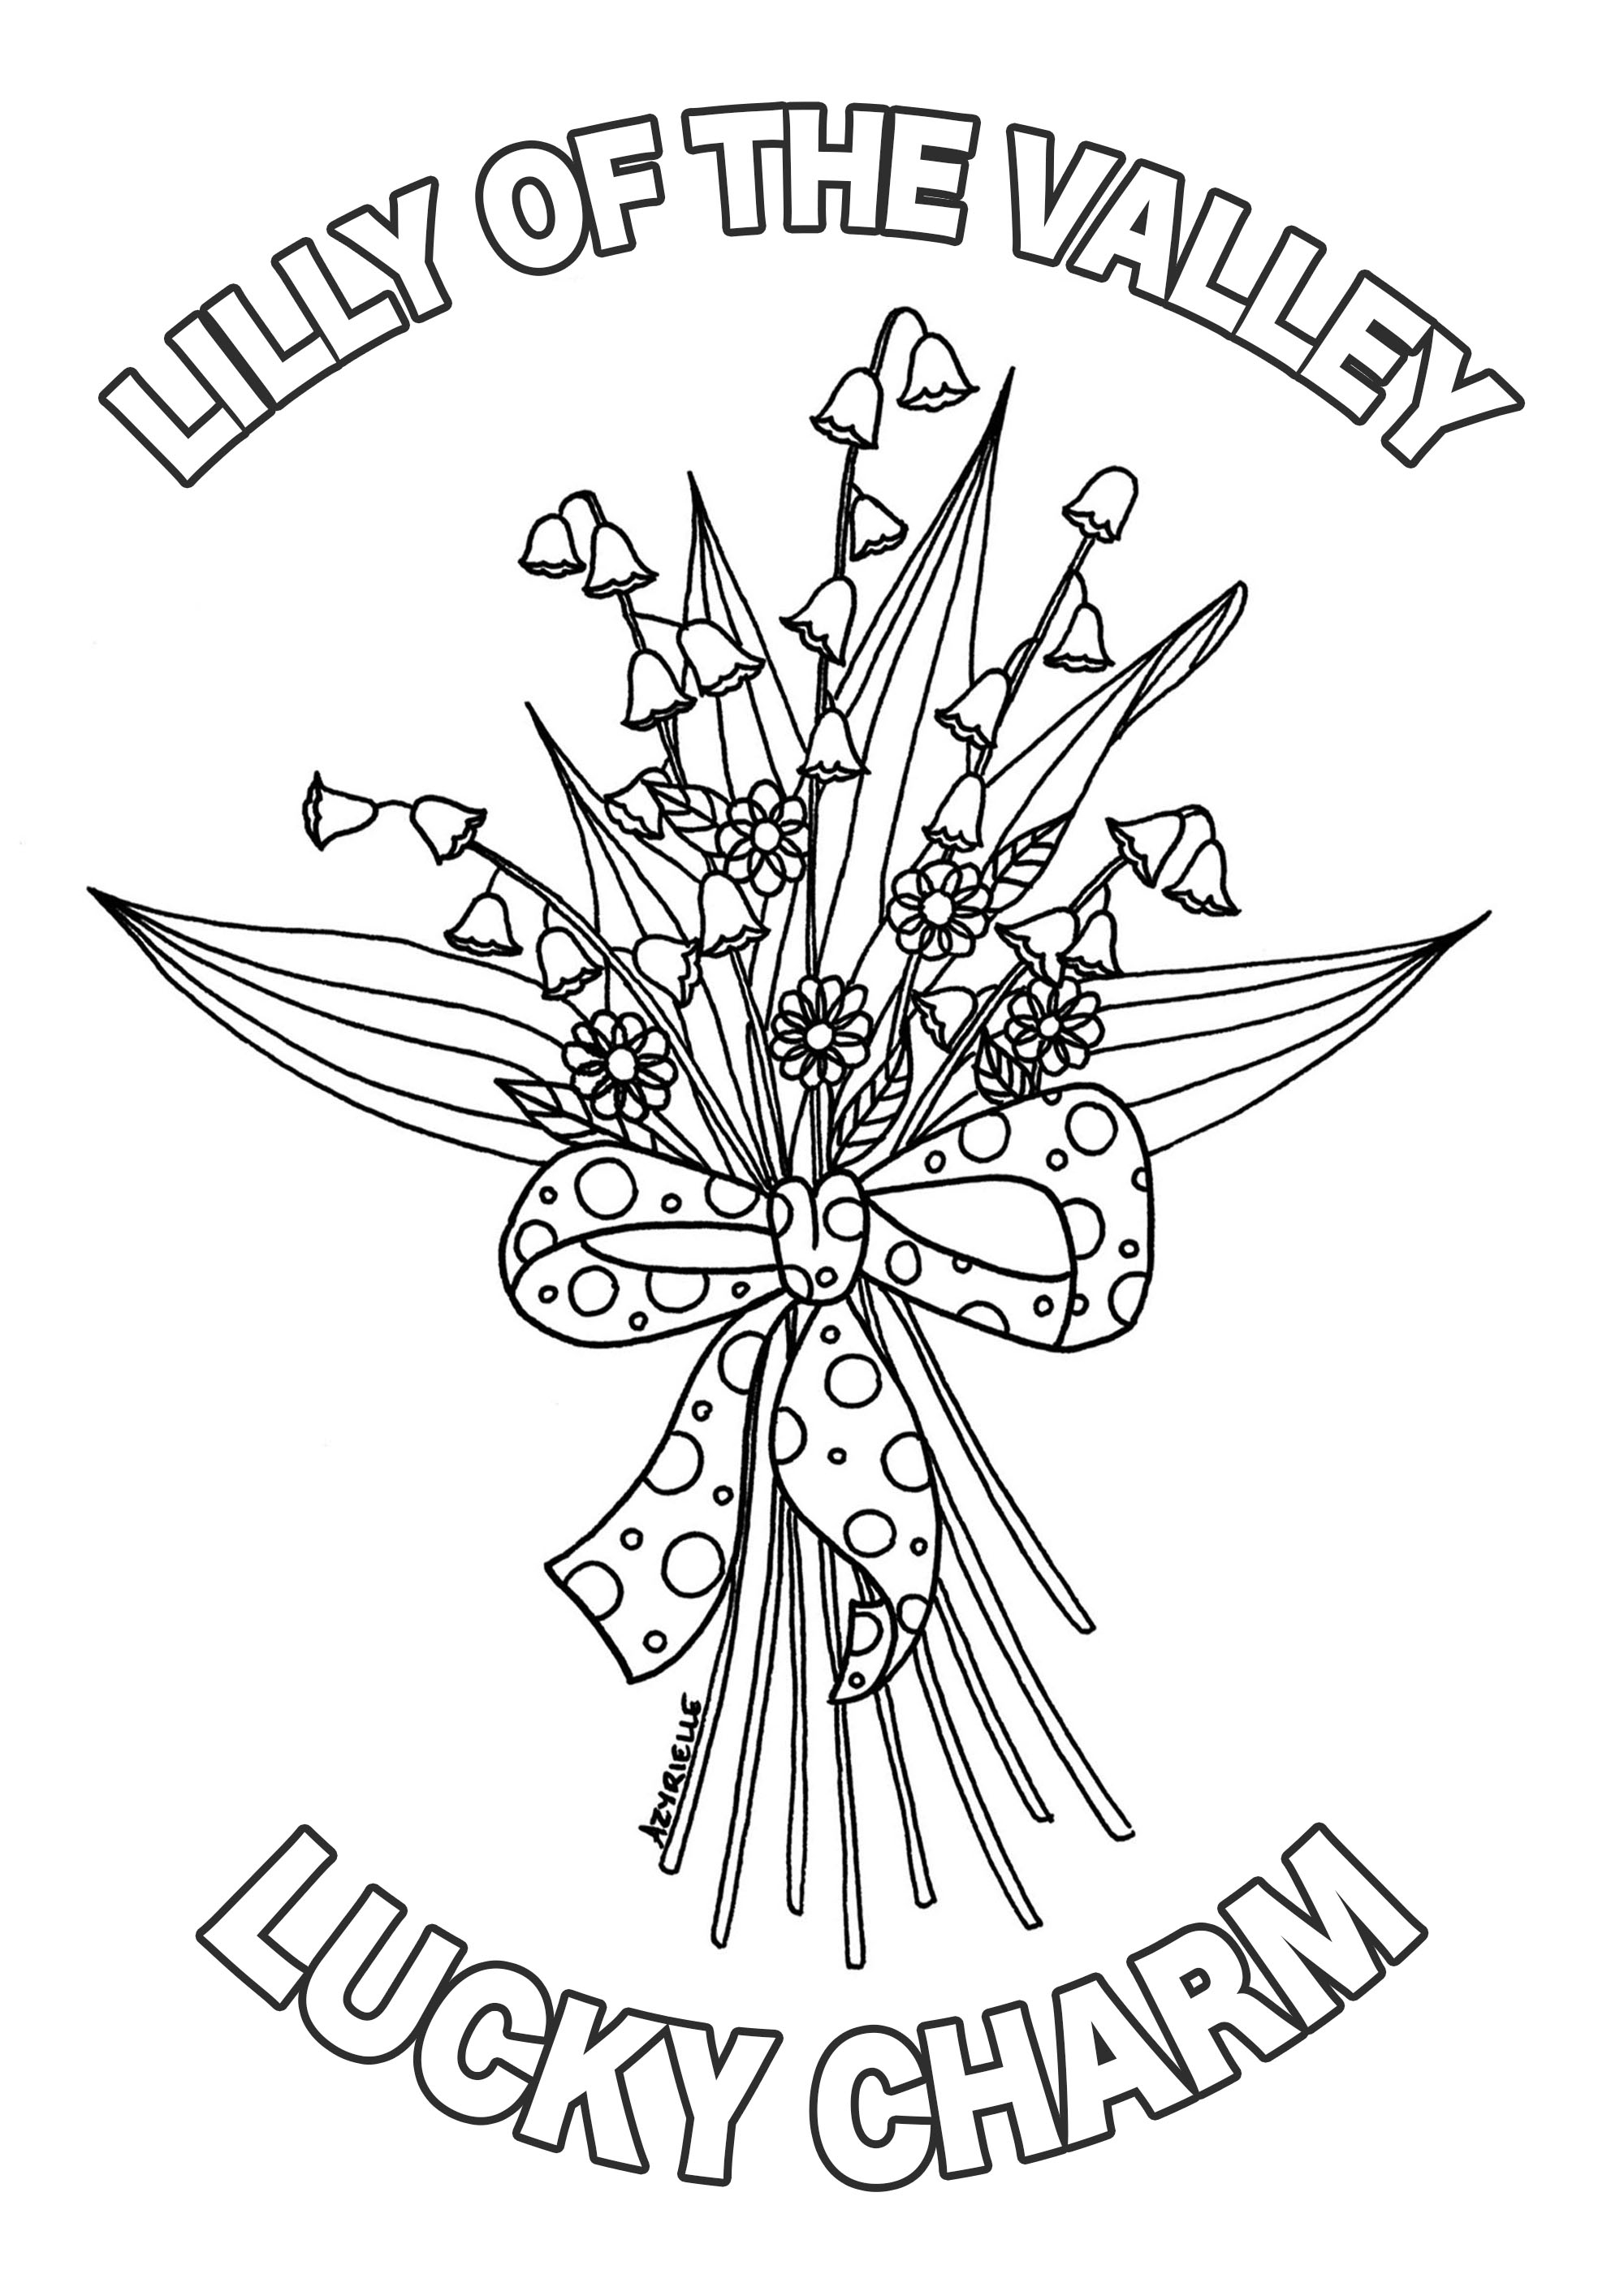 Lily Of The Valley Coloring Page Lilly Of The Valley With Text Flowers Adult Coloring Pages